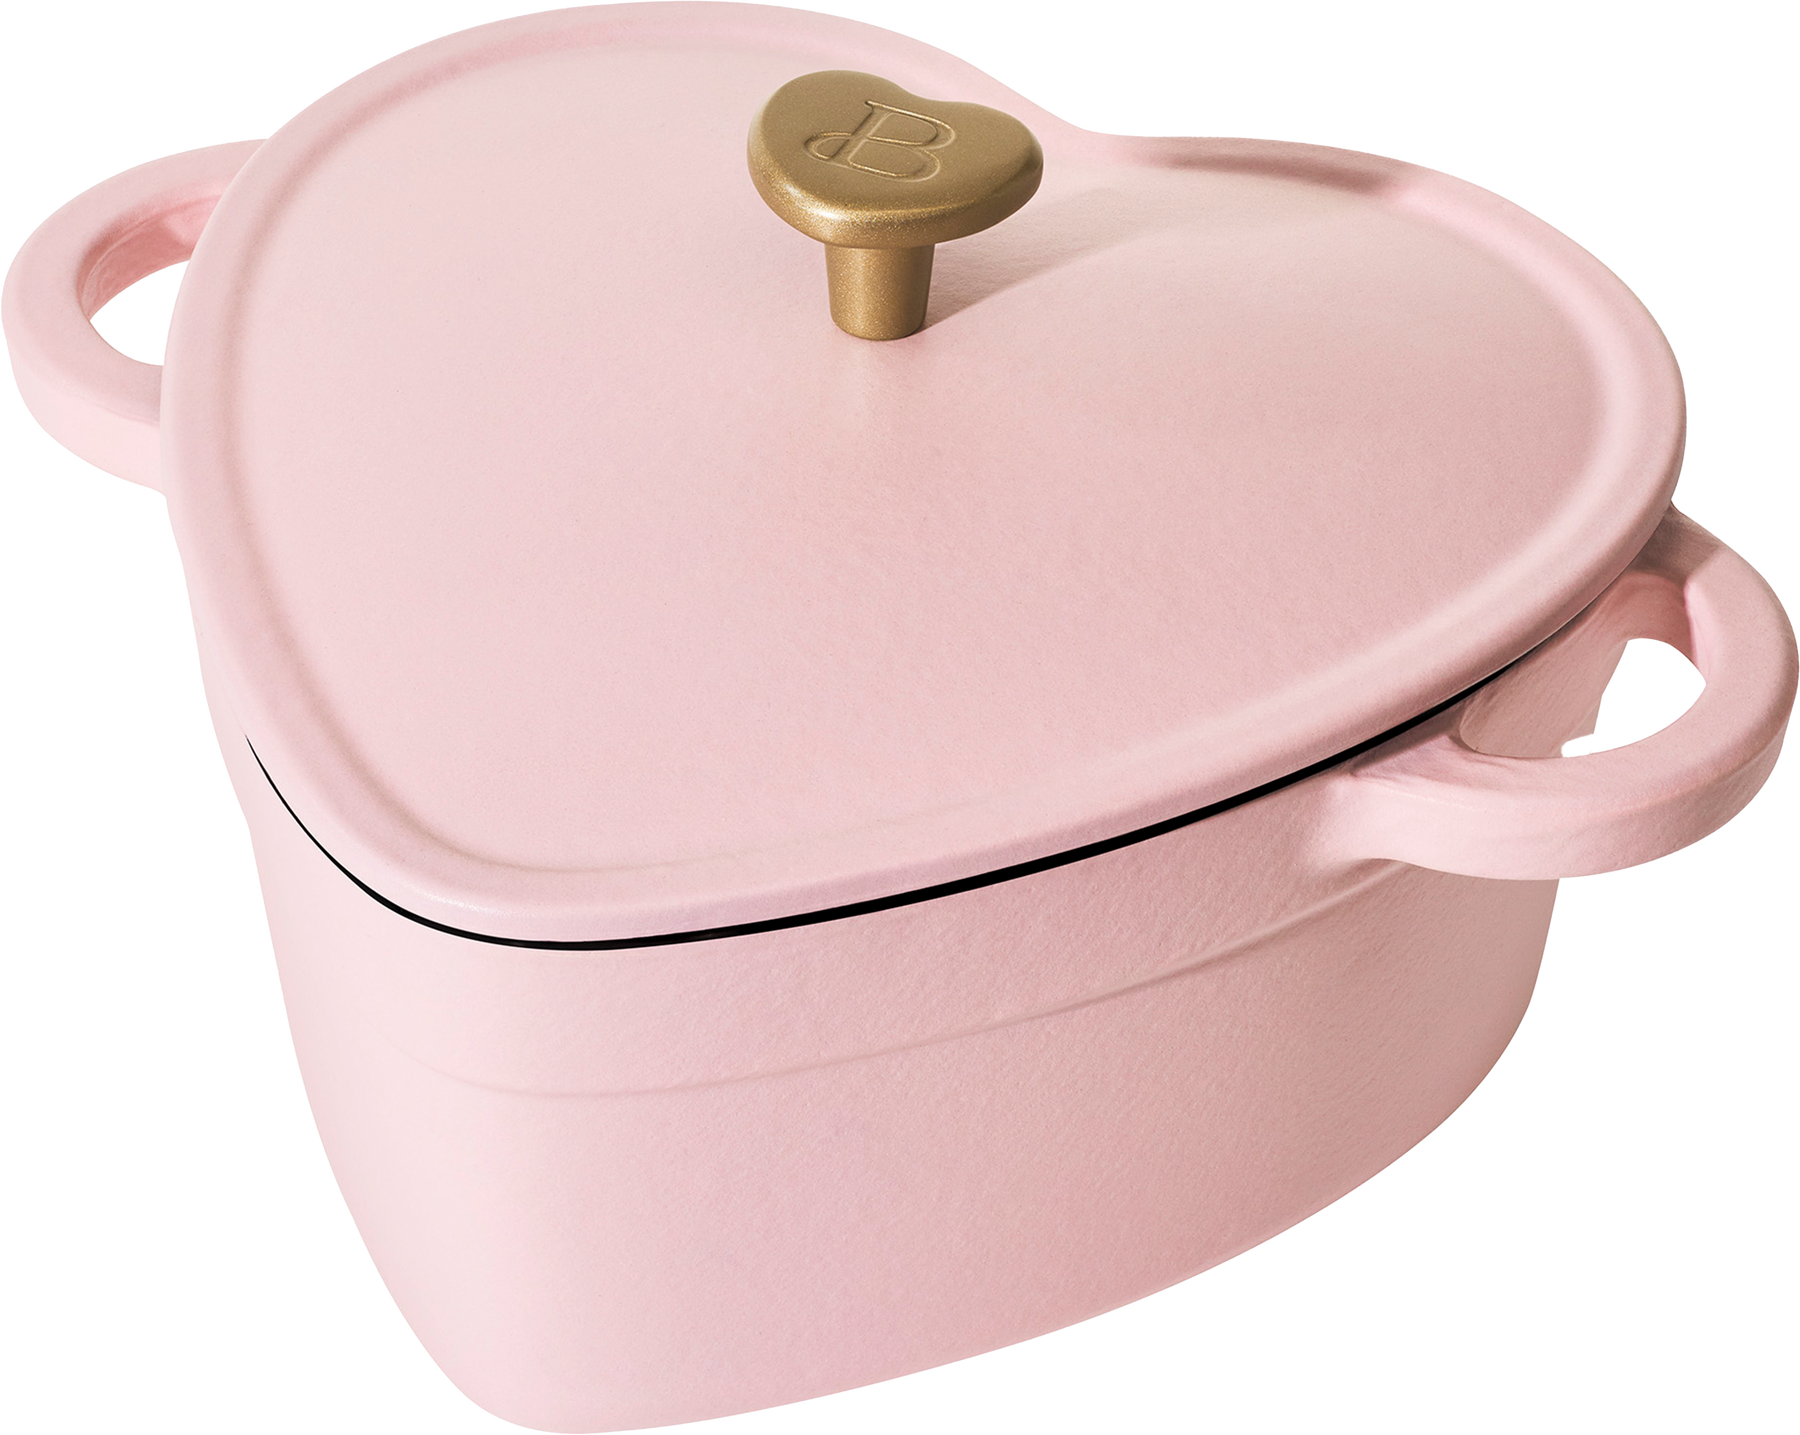 Beautiful 2QT Cast Iron Heart Dutch Oven, Pink Champagne by Drew Barrymore